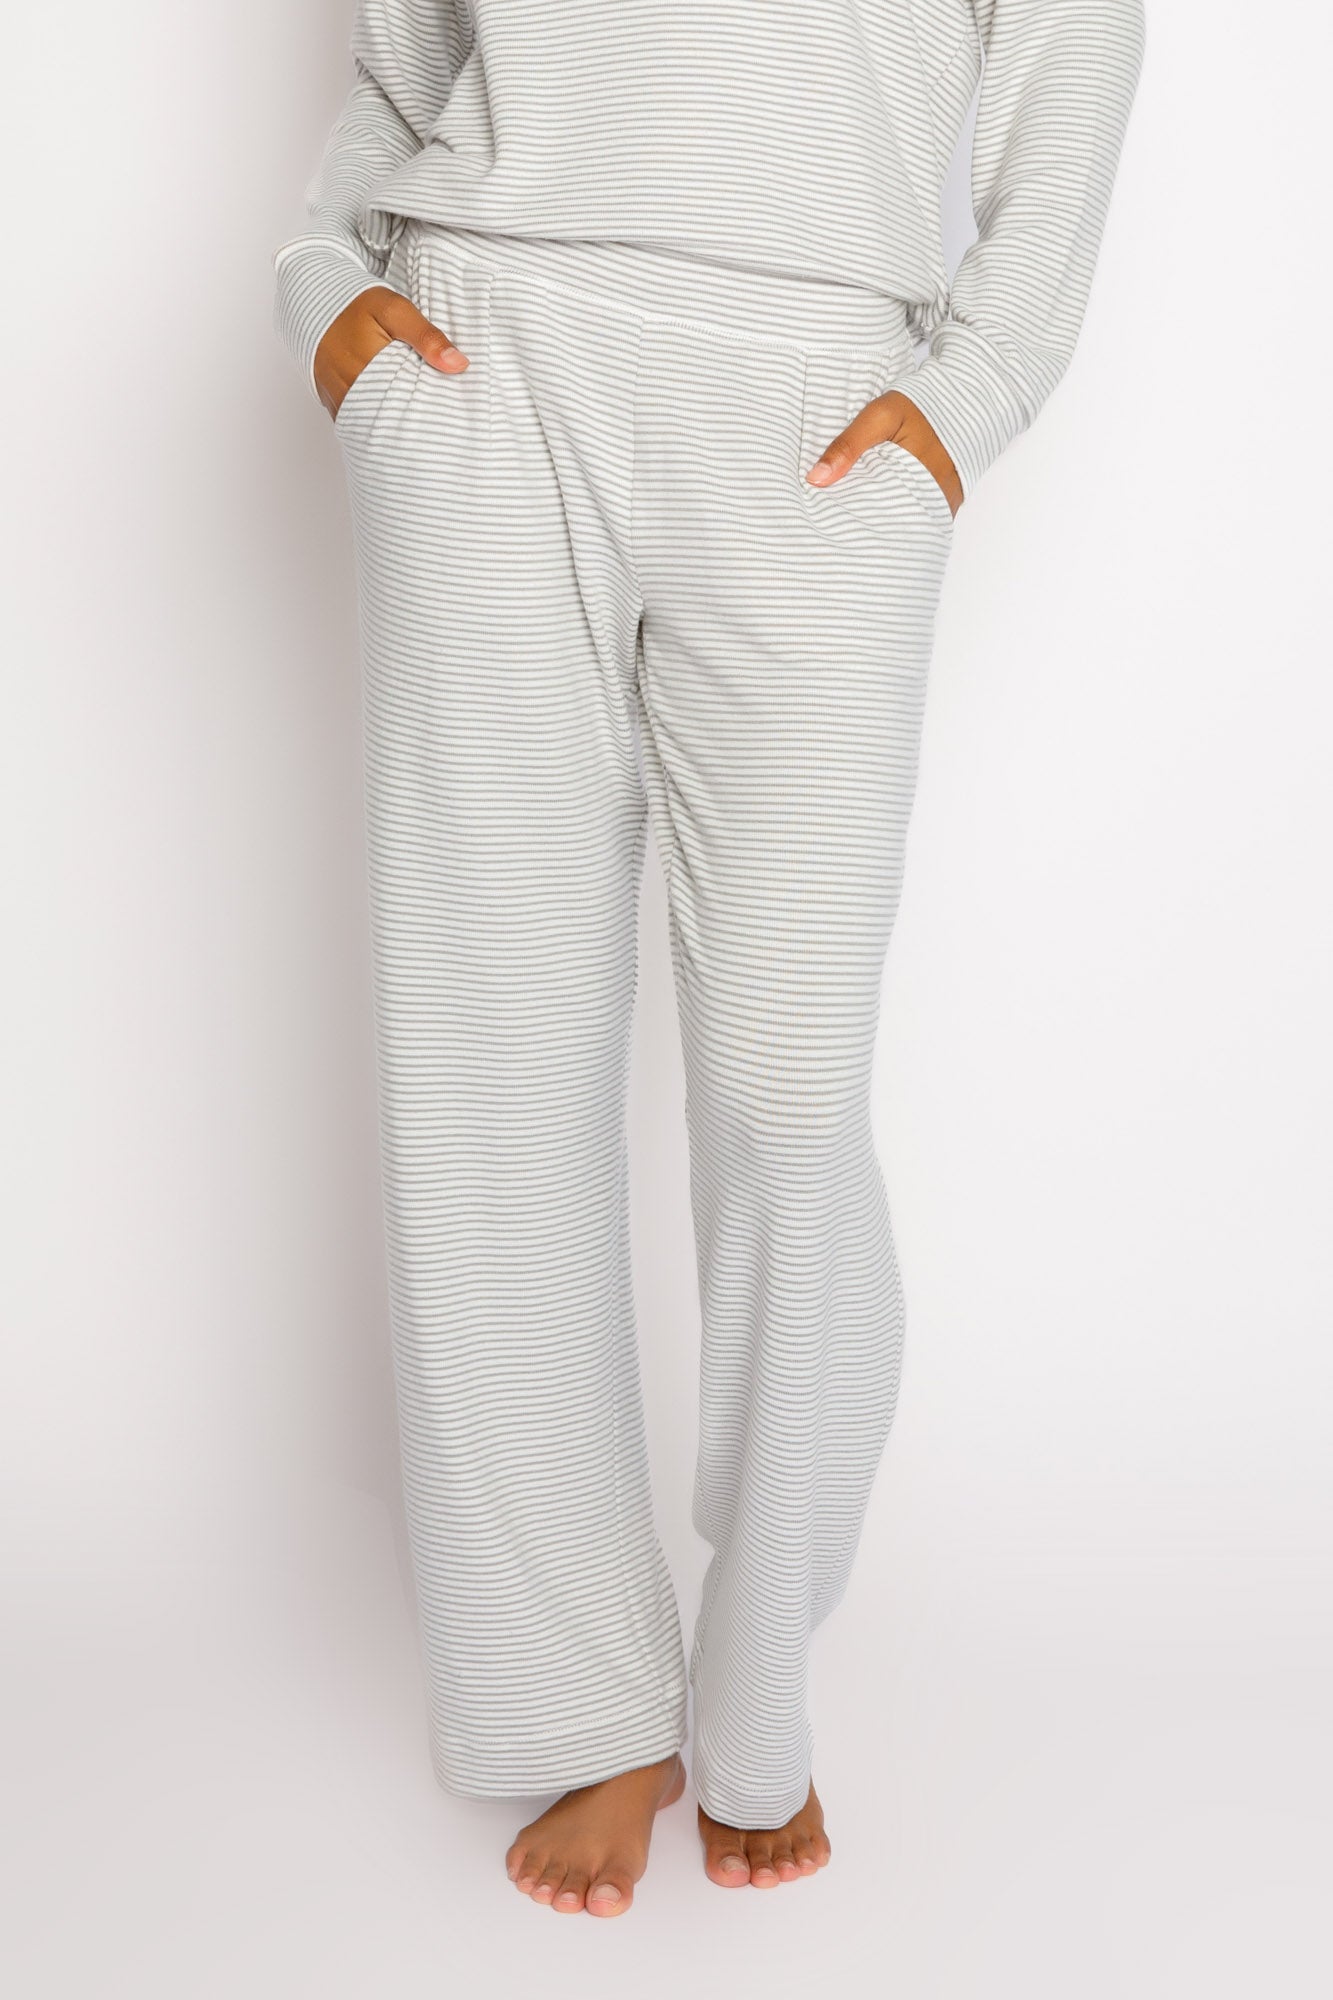 Lounge Wear from PJ Salvage for Women in Gray